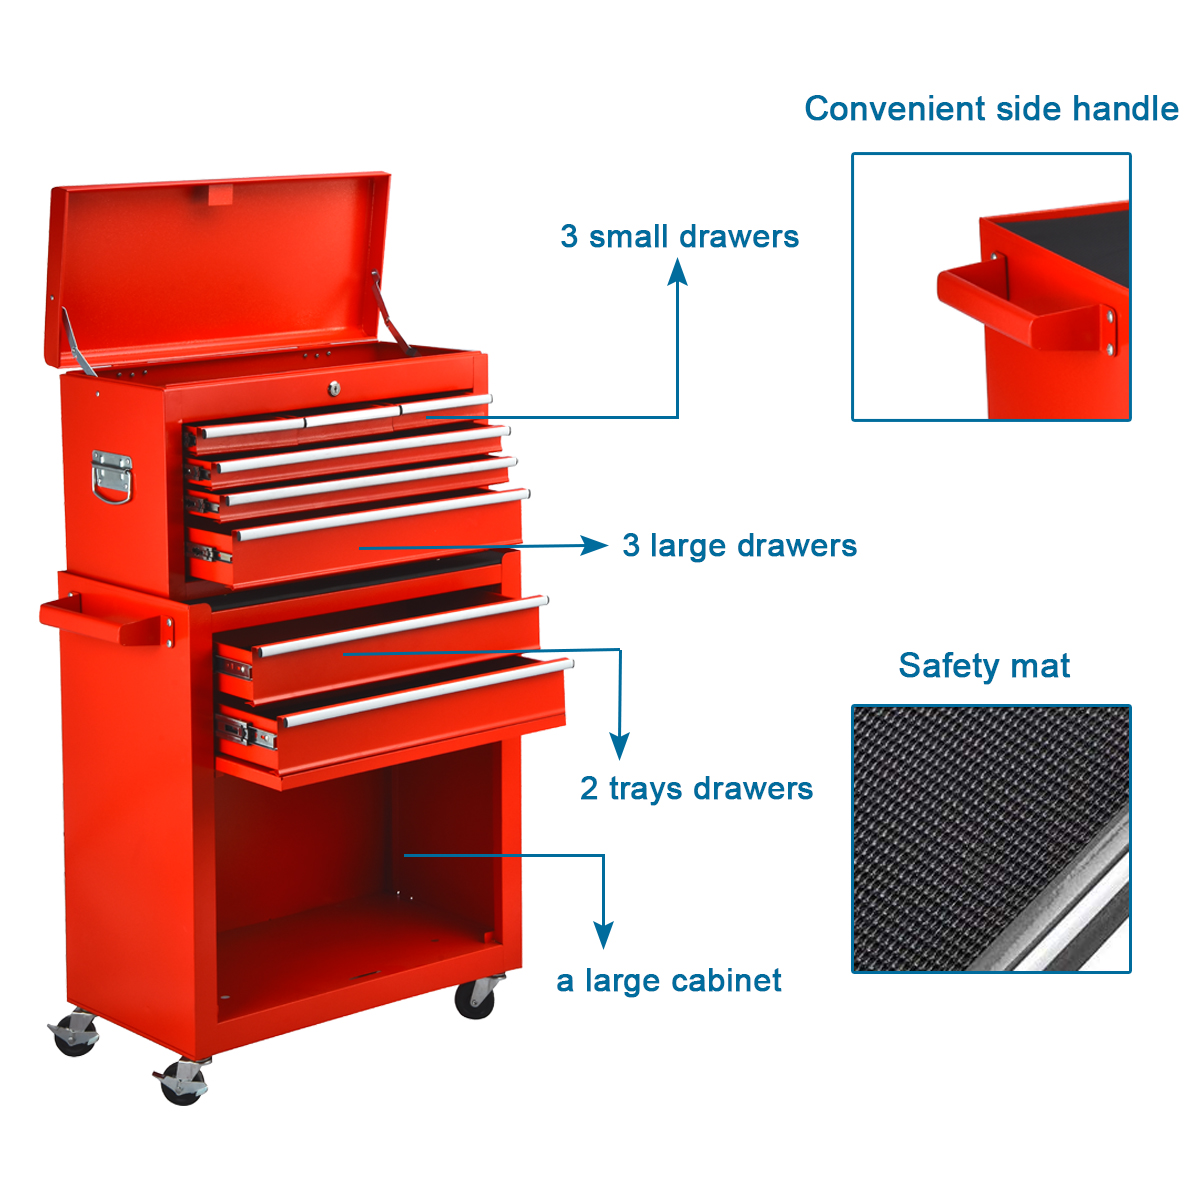 Odaof 8 Drawer Mechanic Tool Chest with Wheels Heavy Duty Rolling Tool Box Cabinet with Riser Sliding Drawers Keyed Locking System Top Detachable Toolbox Organizer for Workshop Red - image 3 of 9